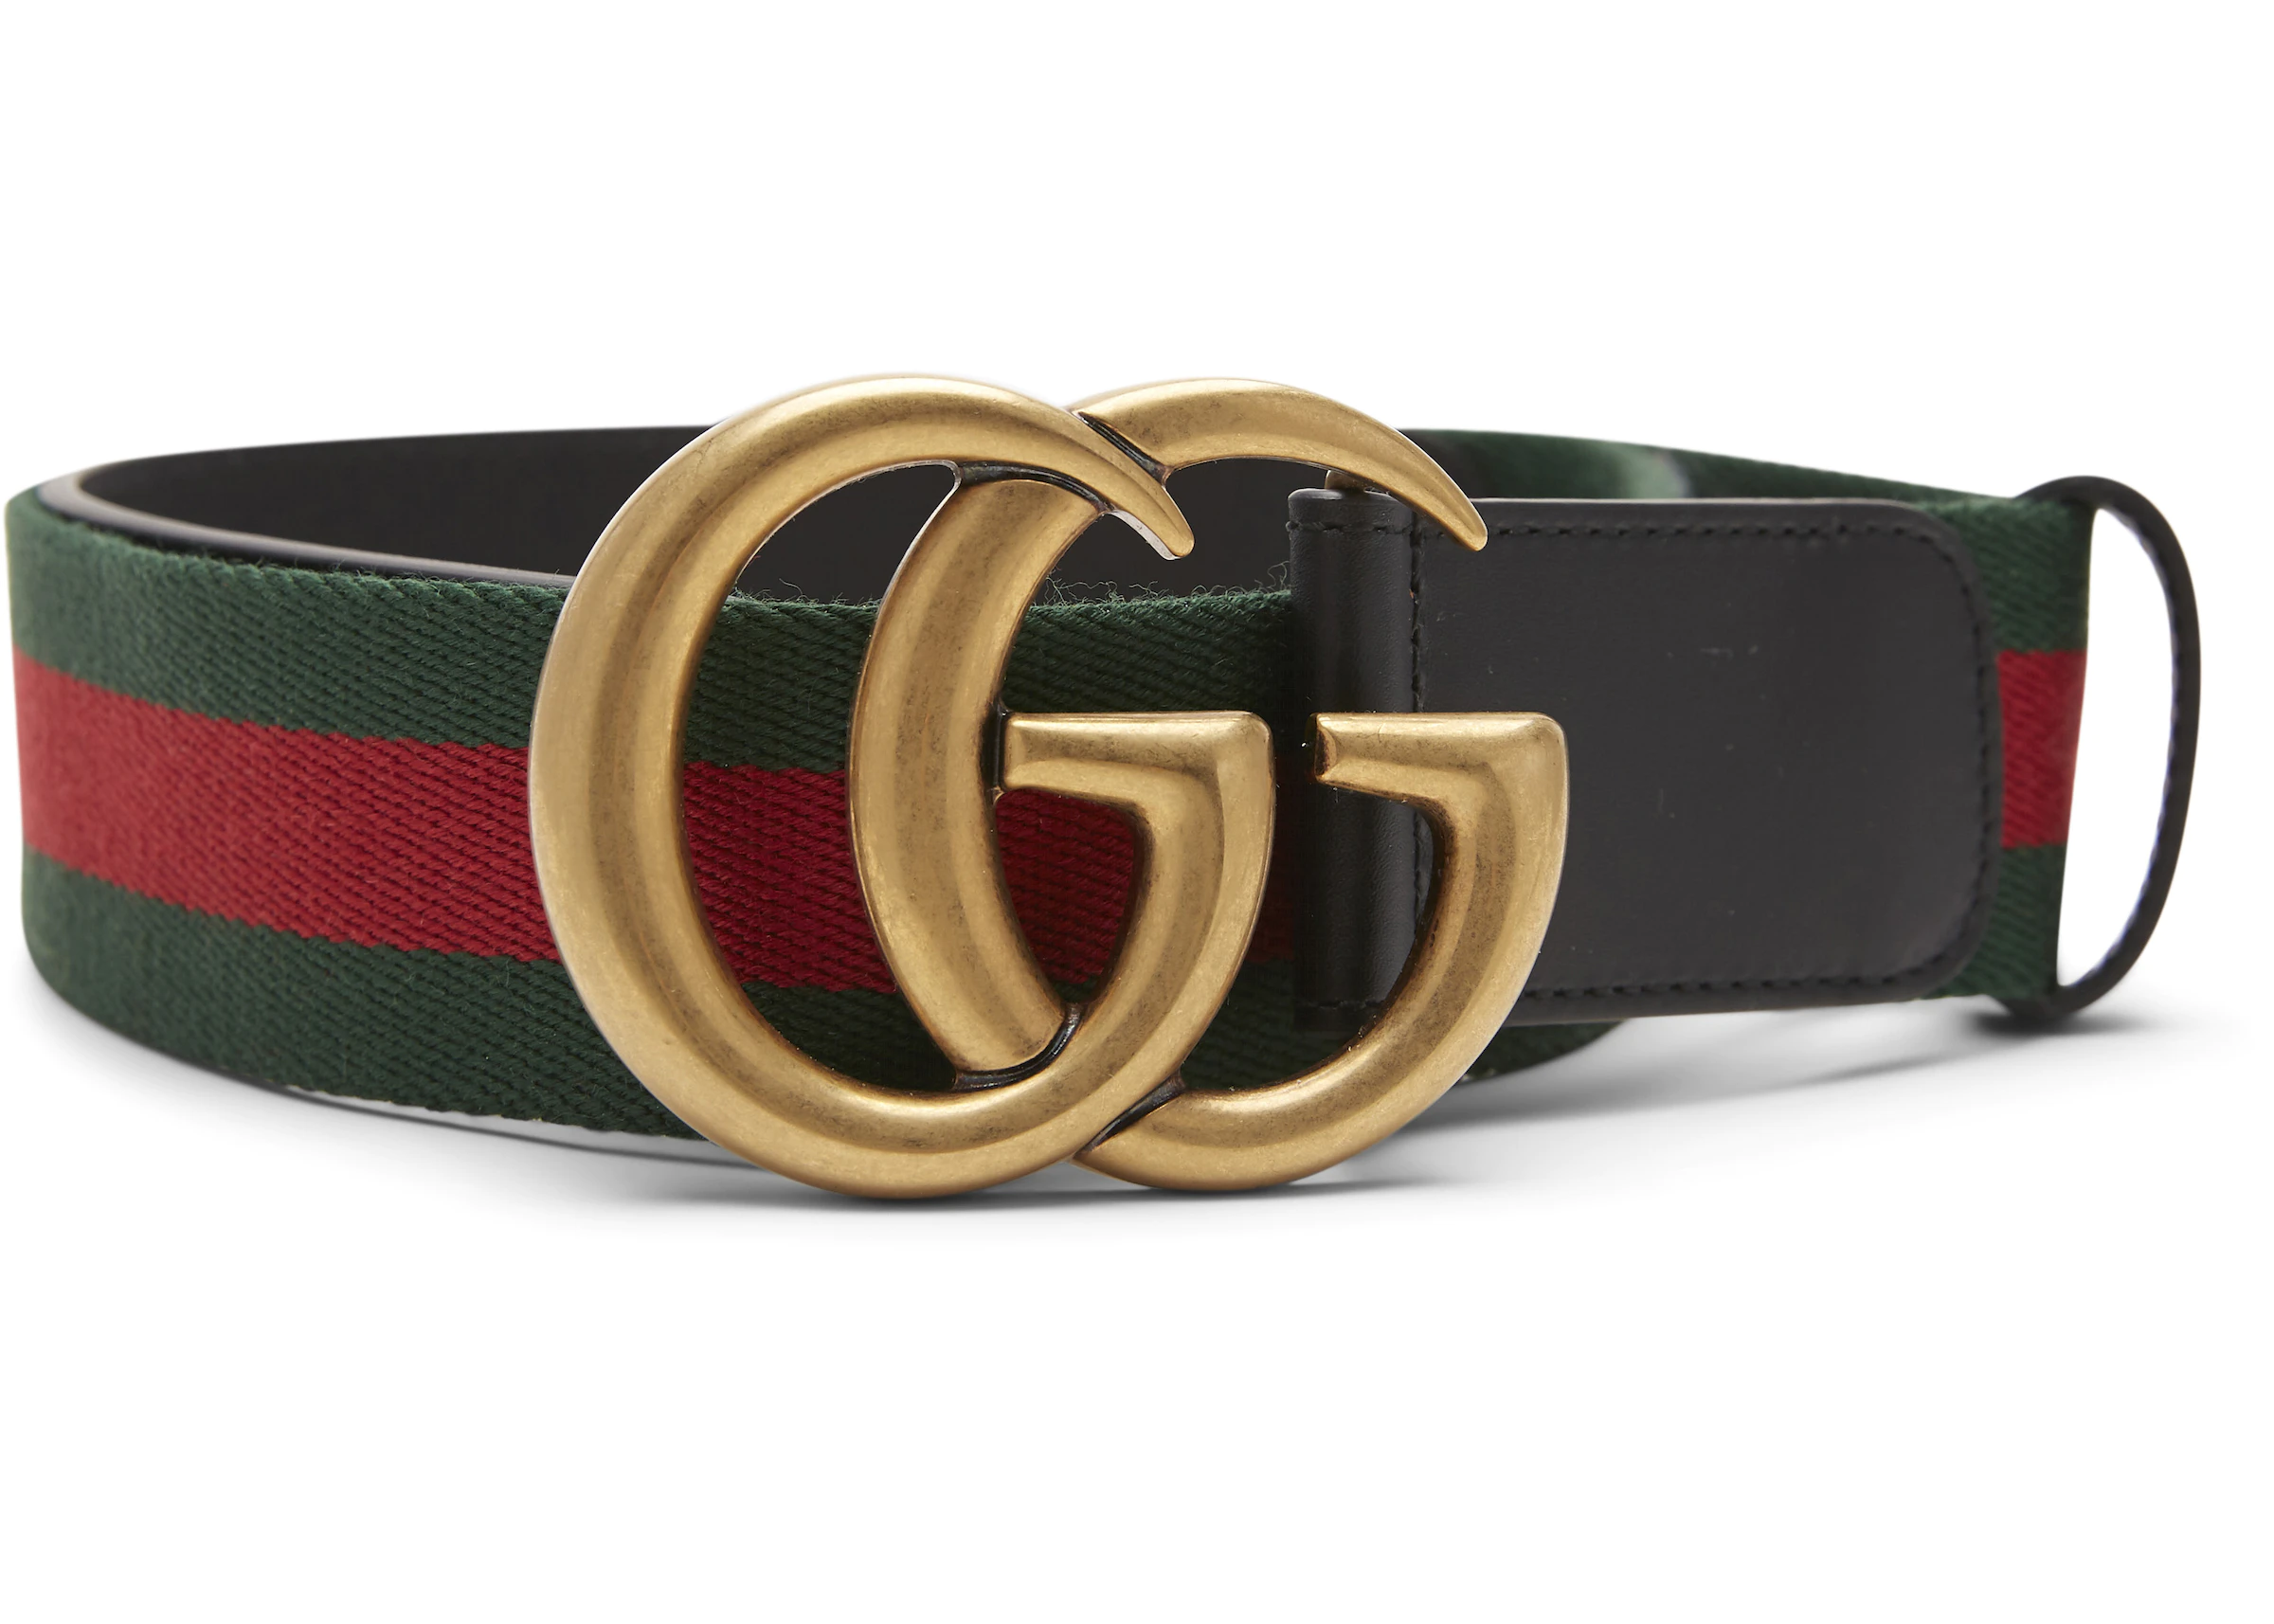 Gucci Belt Prices in South Africa